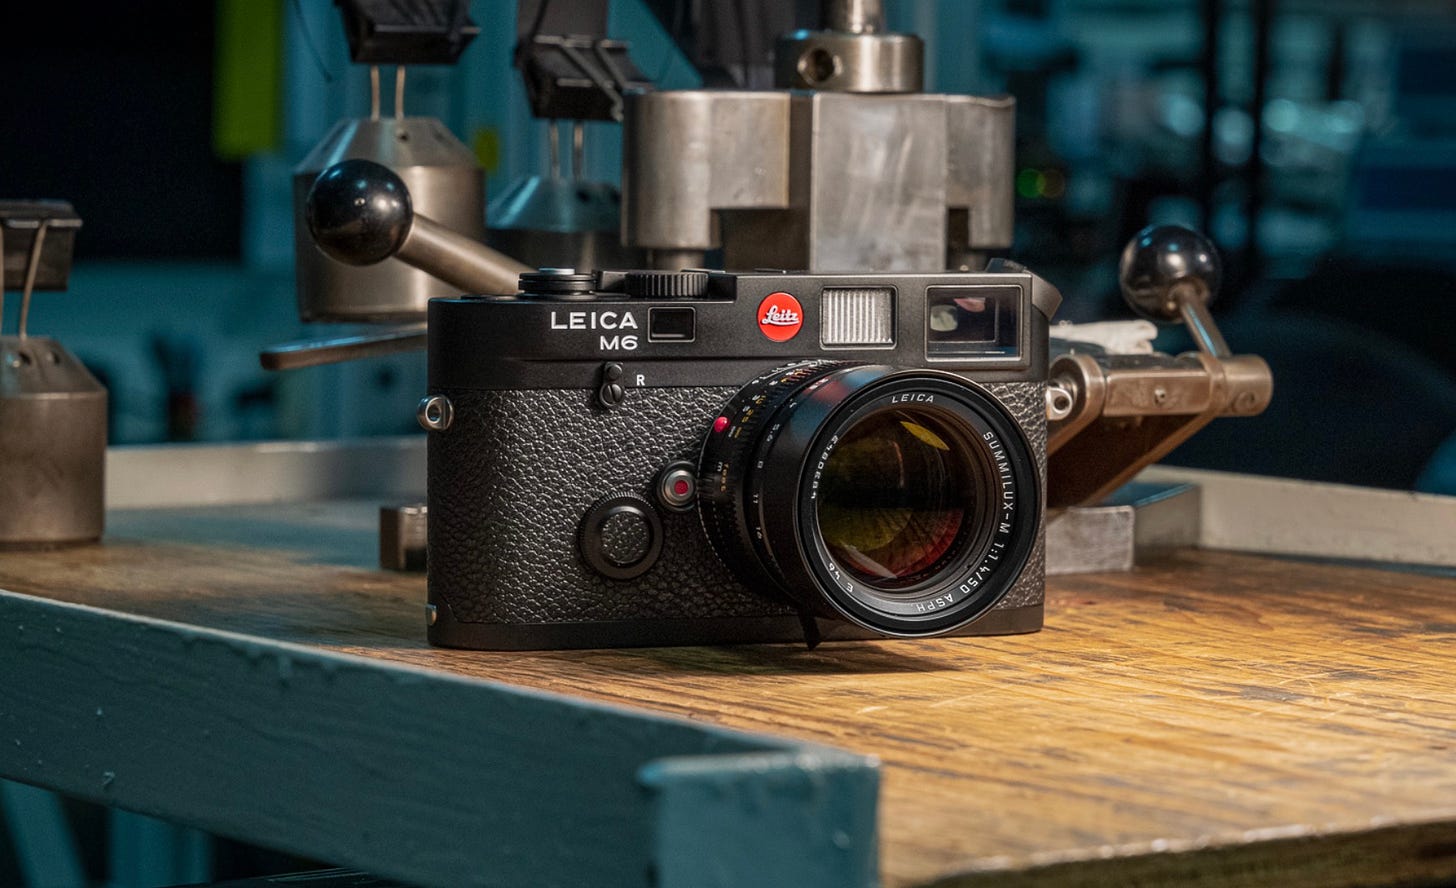 Leica re-releases the Leica M6 film camera for $5,295 with updated  viewfinder, 'modern electronics' and more: Digital Photography Review